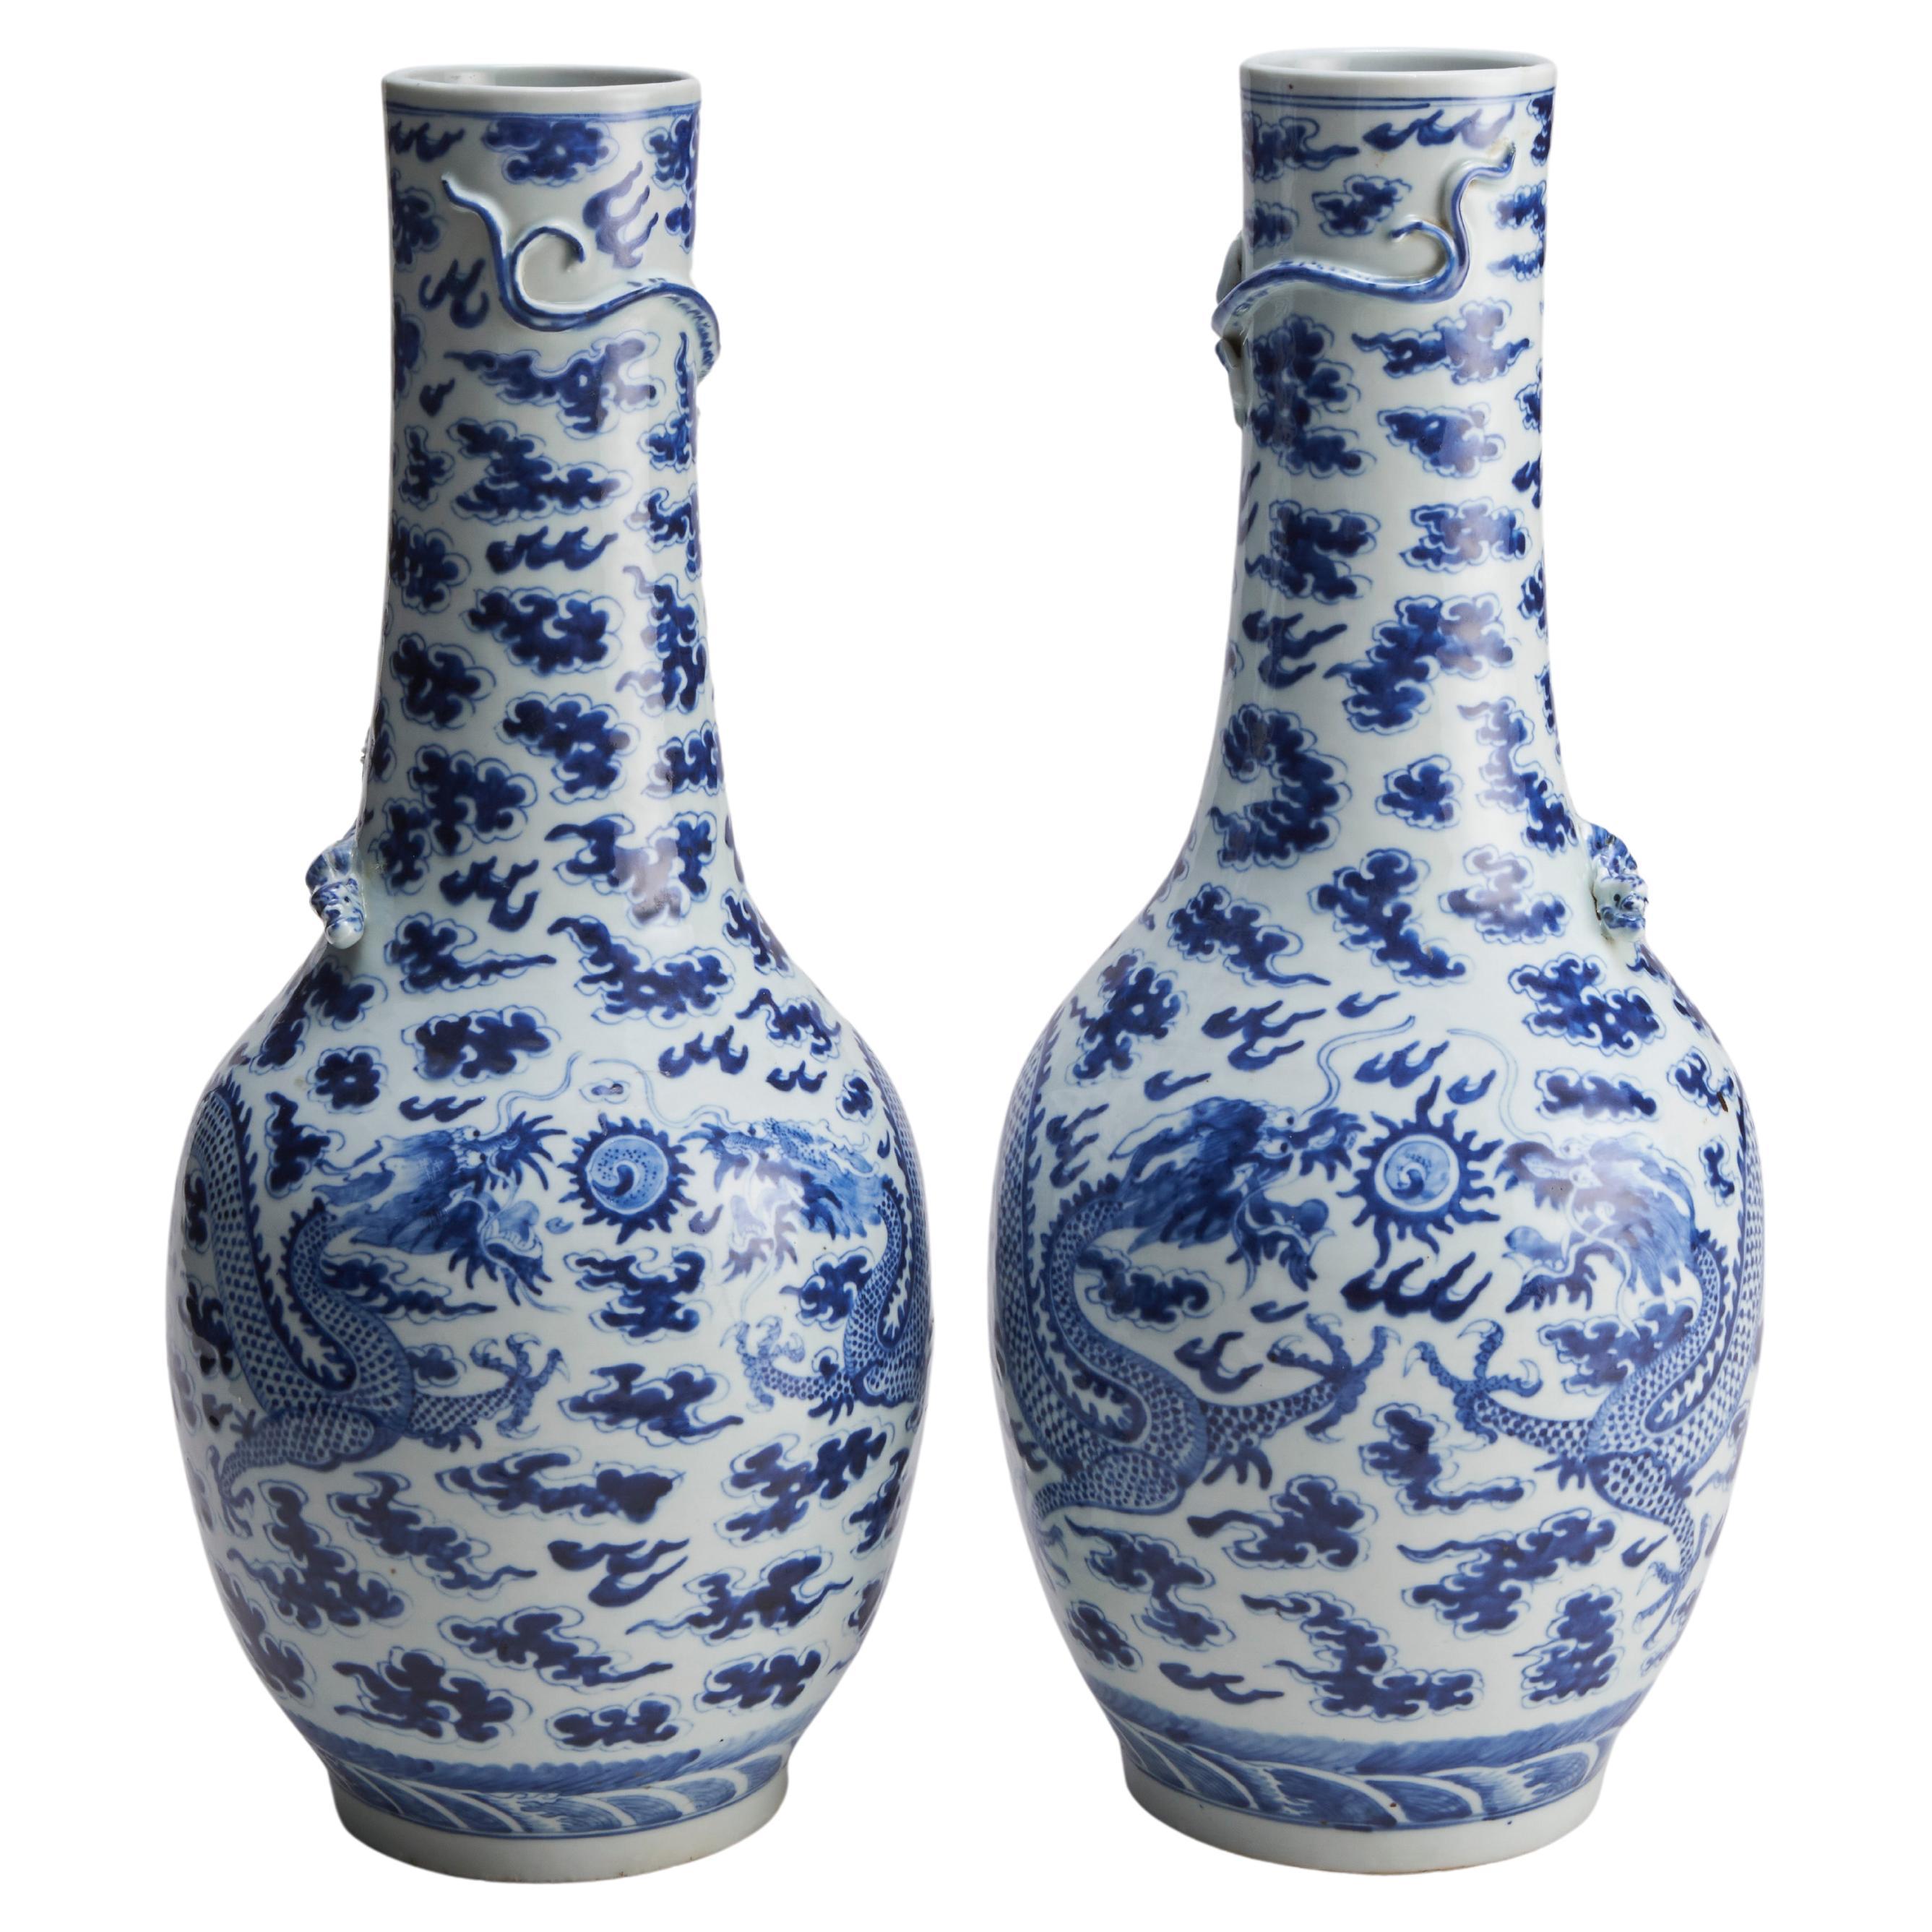 A large (61cm in height) pair of 19th Century Chinese porcelain blue and w